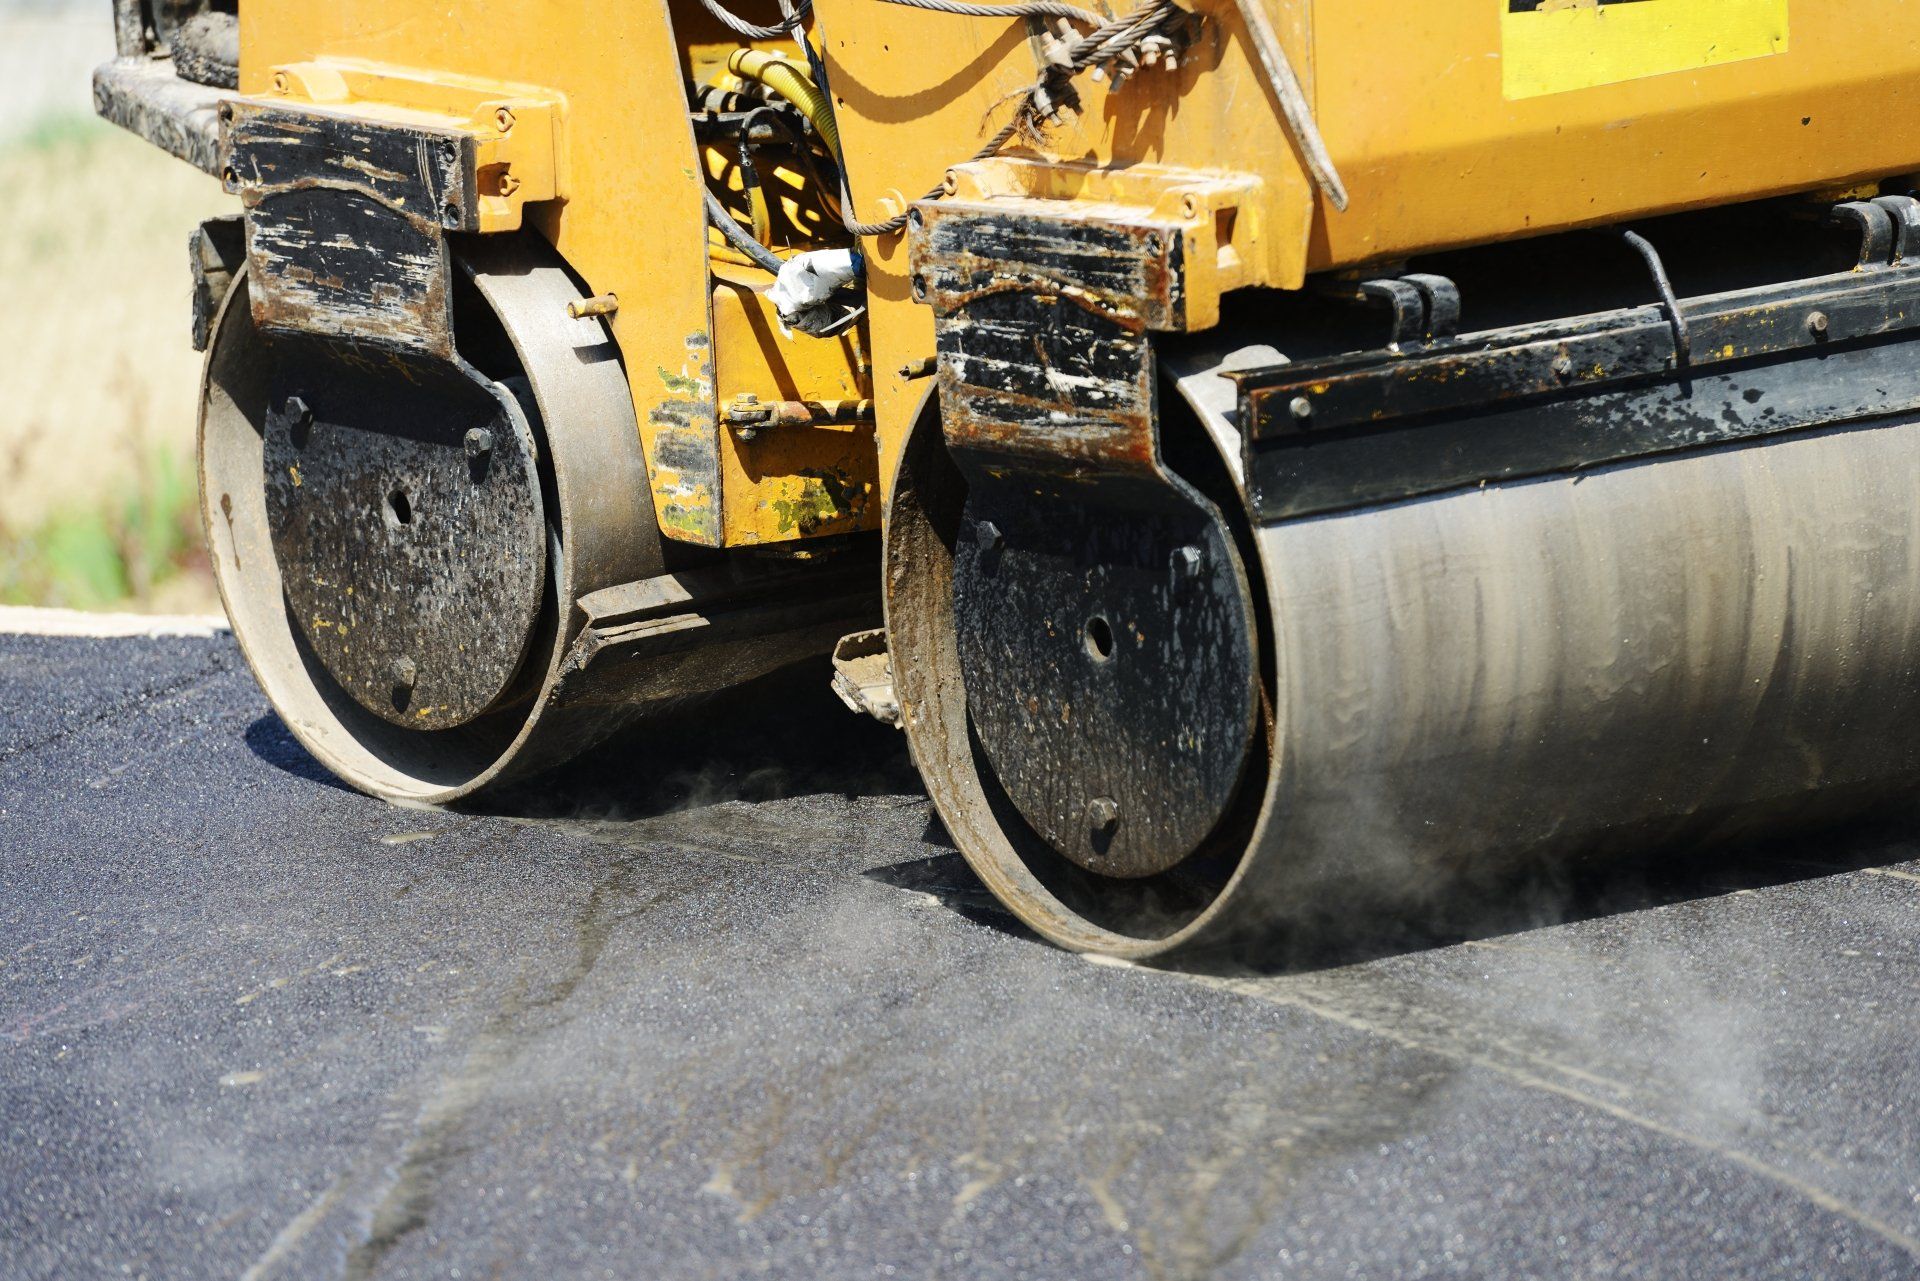 For a more solid protection, a new layer of asphalt is applied.